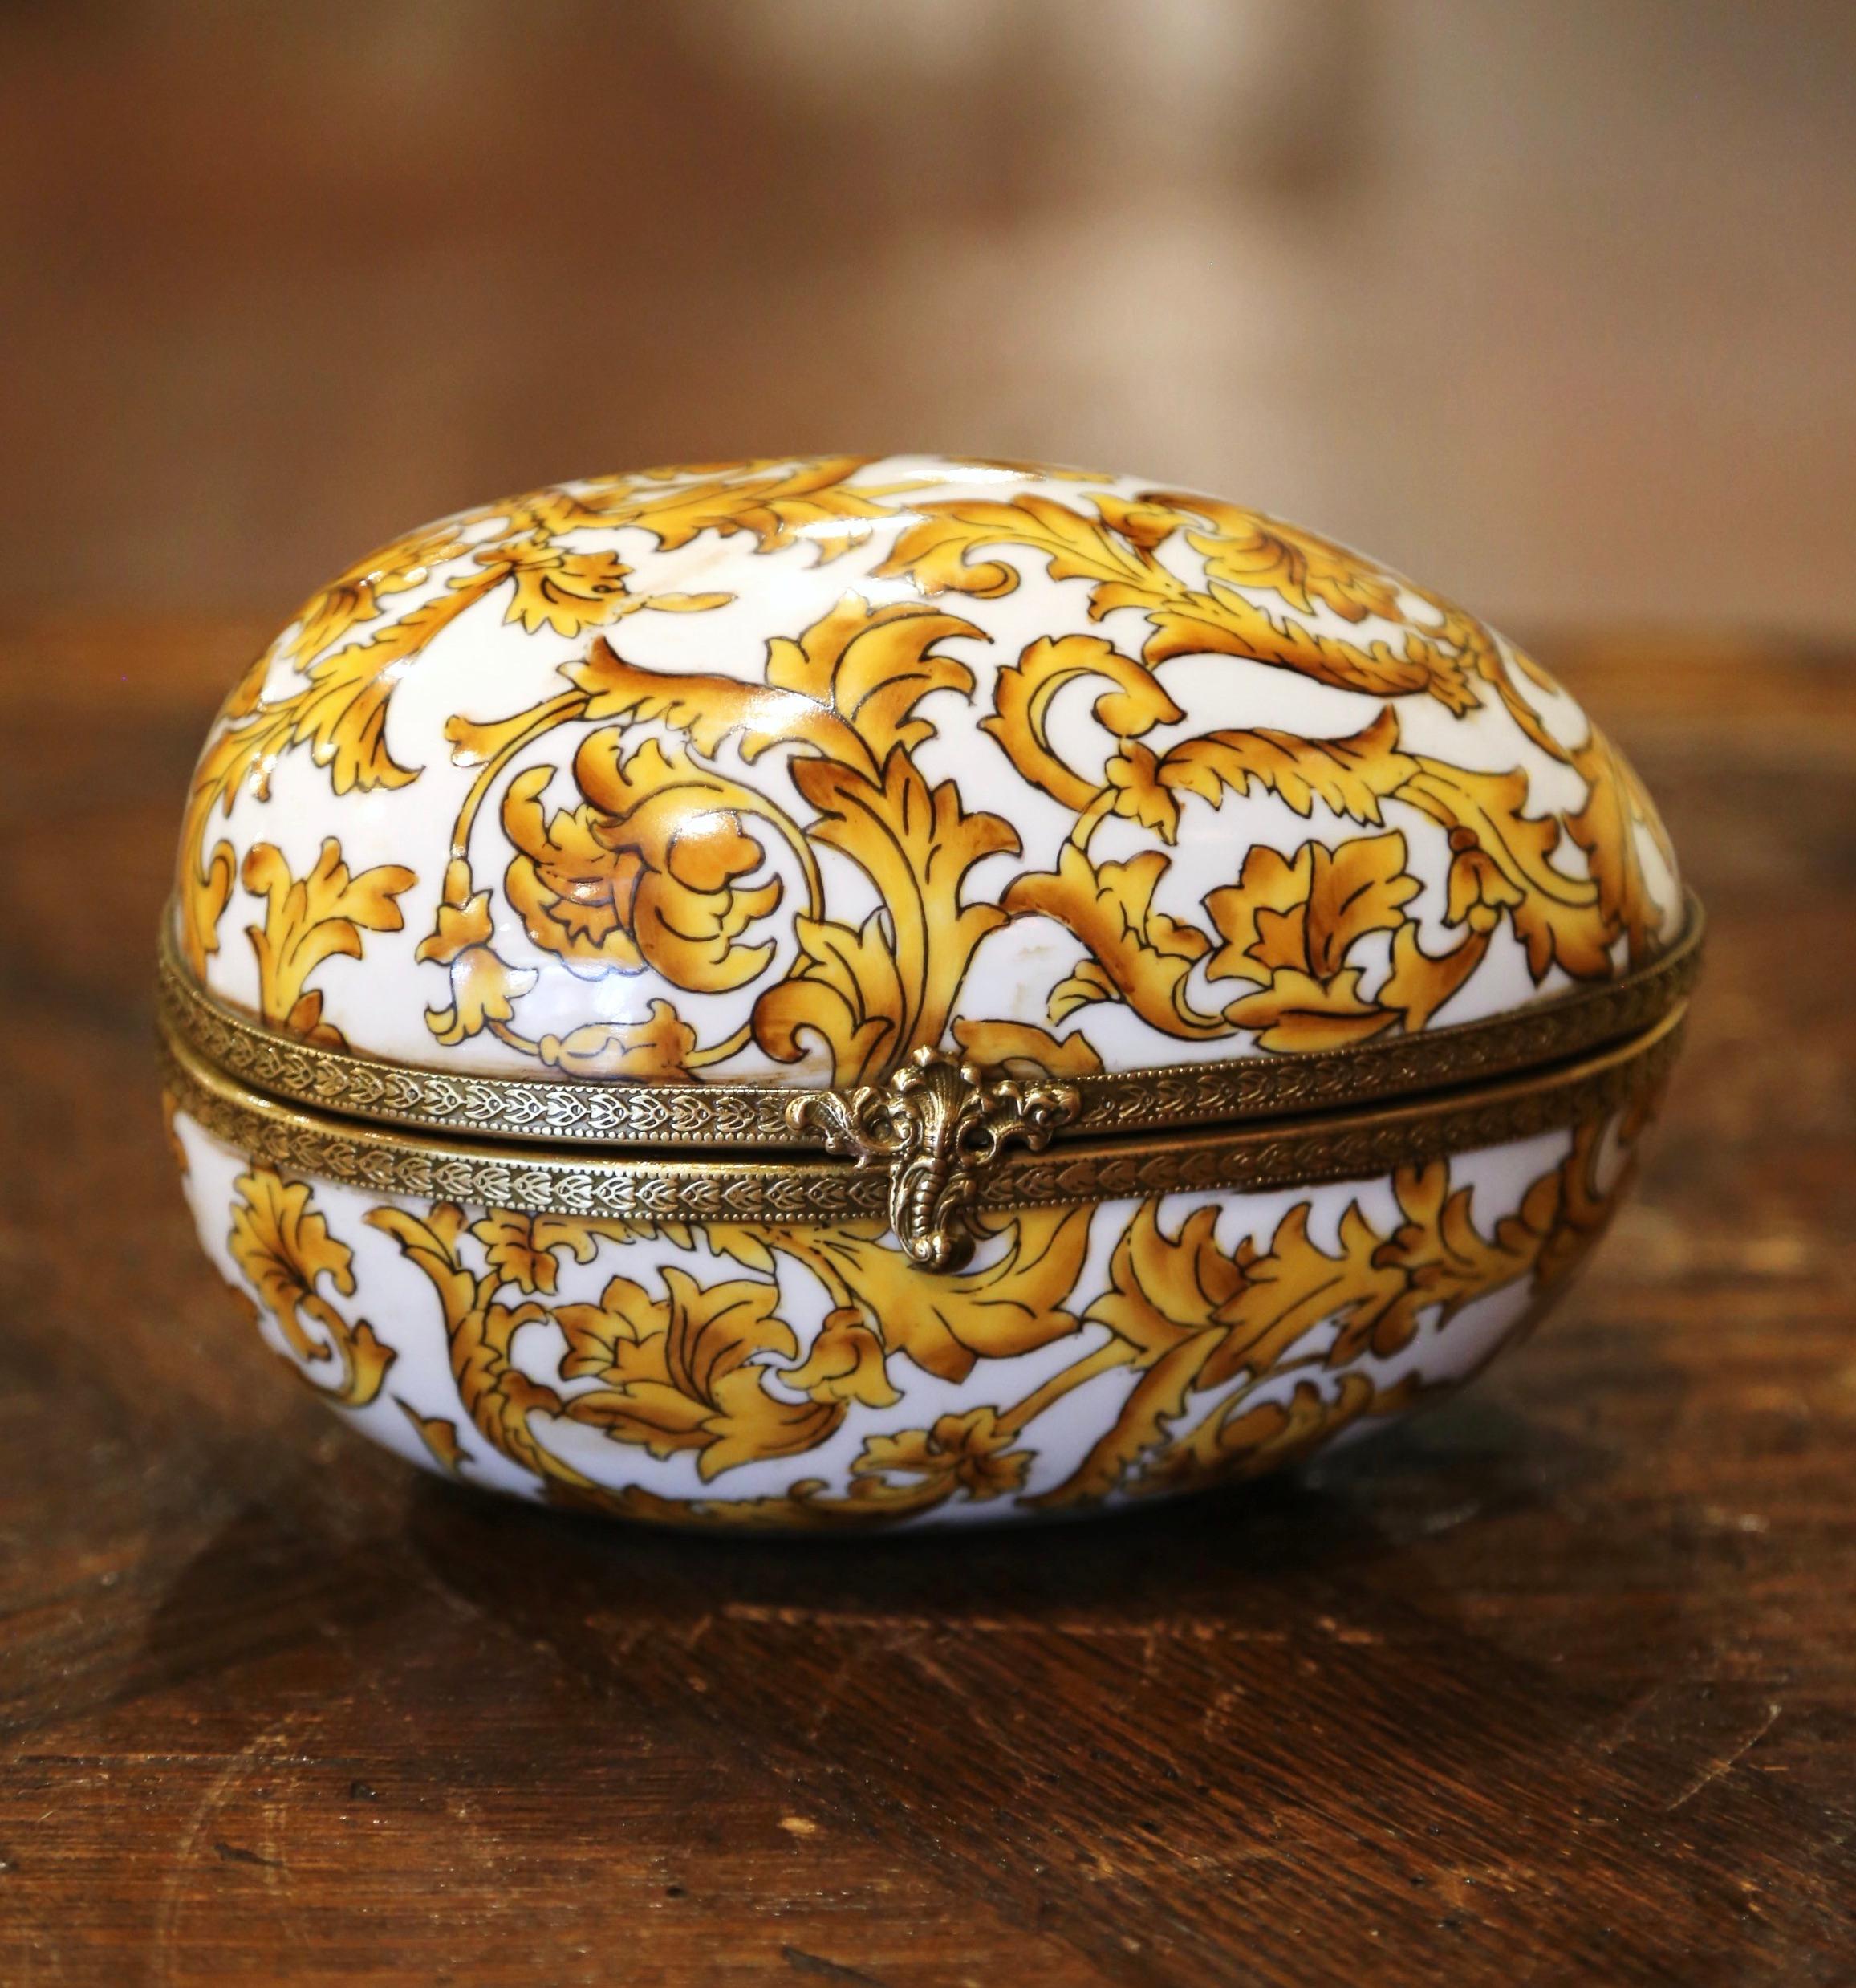 Hand-Crafted 19th Century French Painted Faberge Porcelain Egg Trinket Boxes, Set of 5